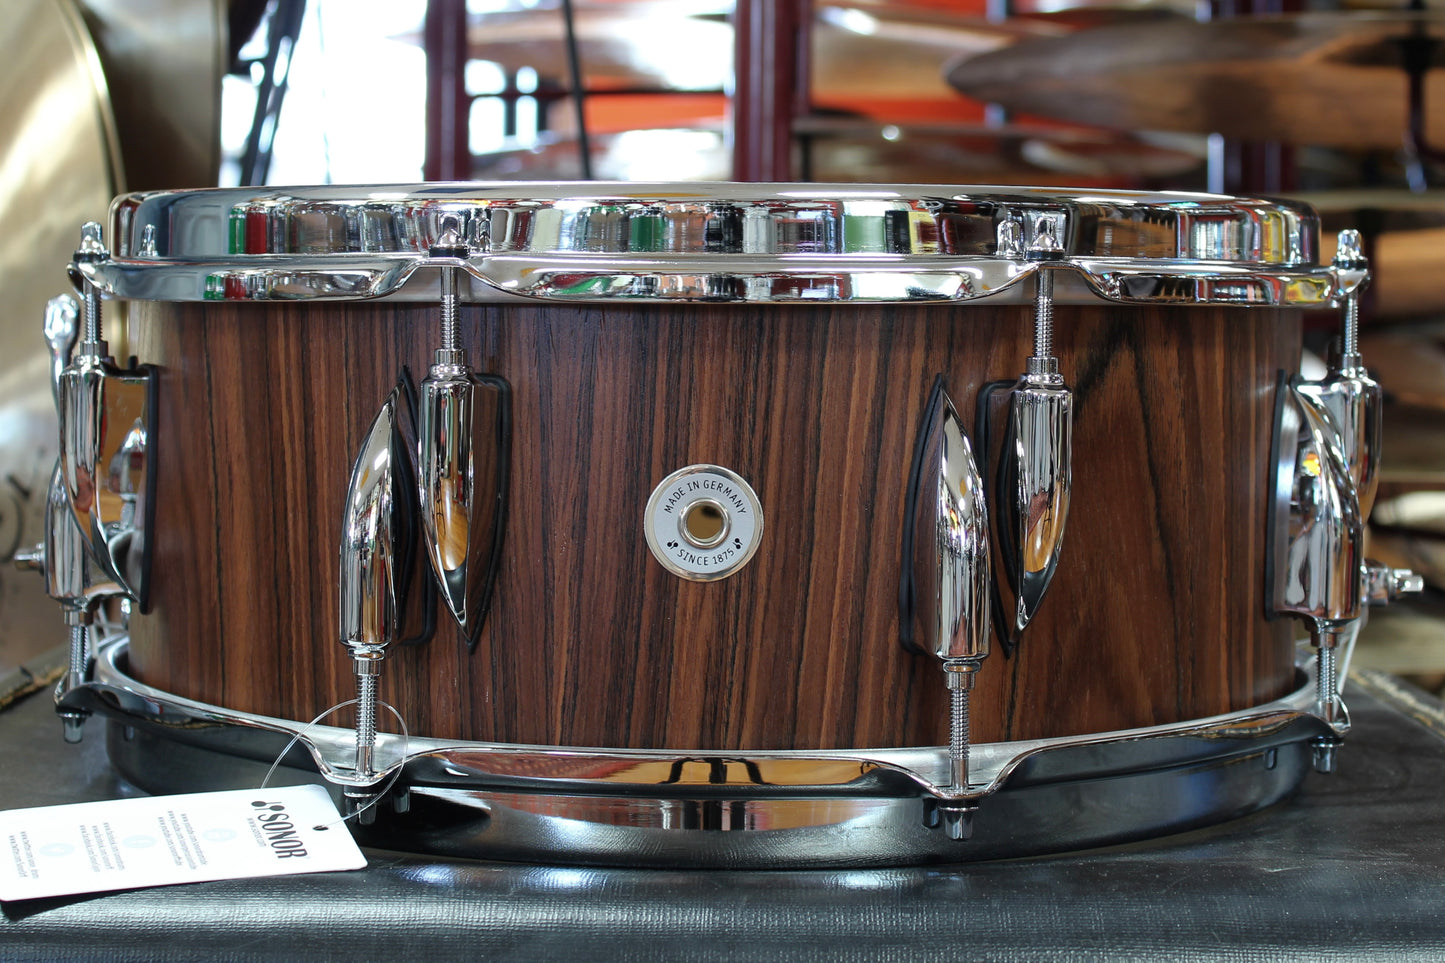 Sonor Vintage Series 5"x14" Beech Snare Drum in Rosewood Semi-Gloss